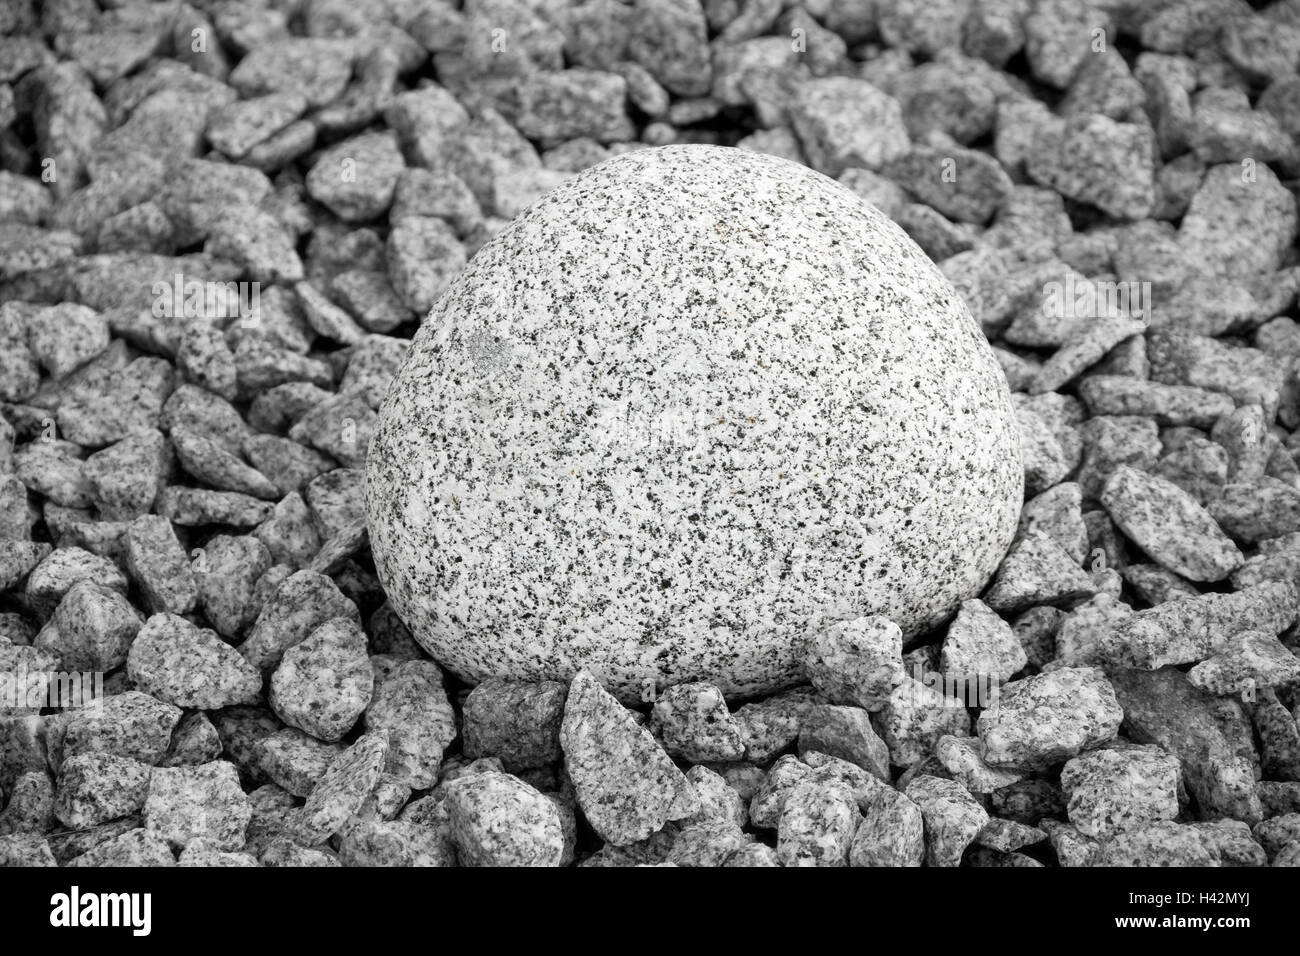 Stones, grey, forms, size, differently, rock, grit, pebble, pebble, largely, small, around, pointed, angularly, square, rounded, nature, nature forms, conspicuously, prominent, contrasts, monochrome, middle, centrally, Stock Photo